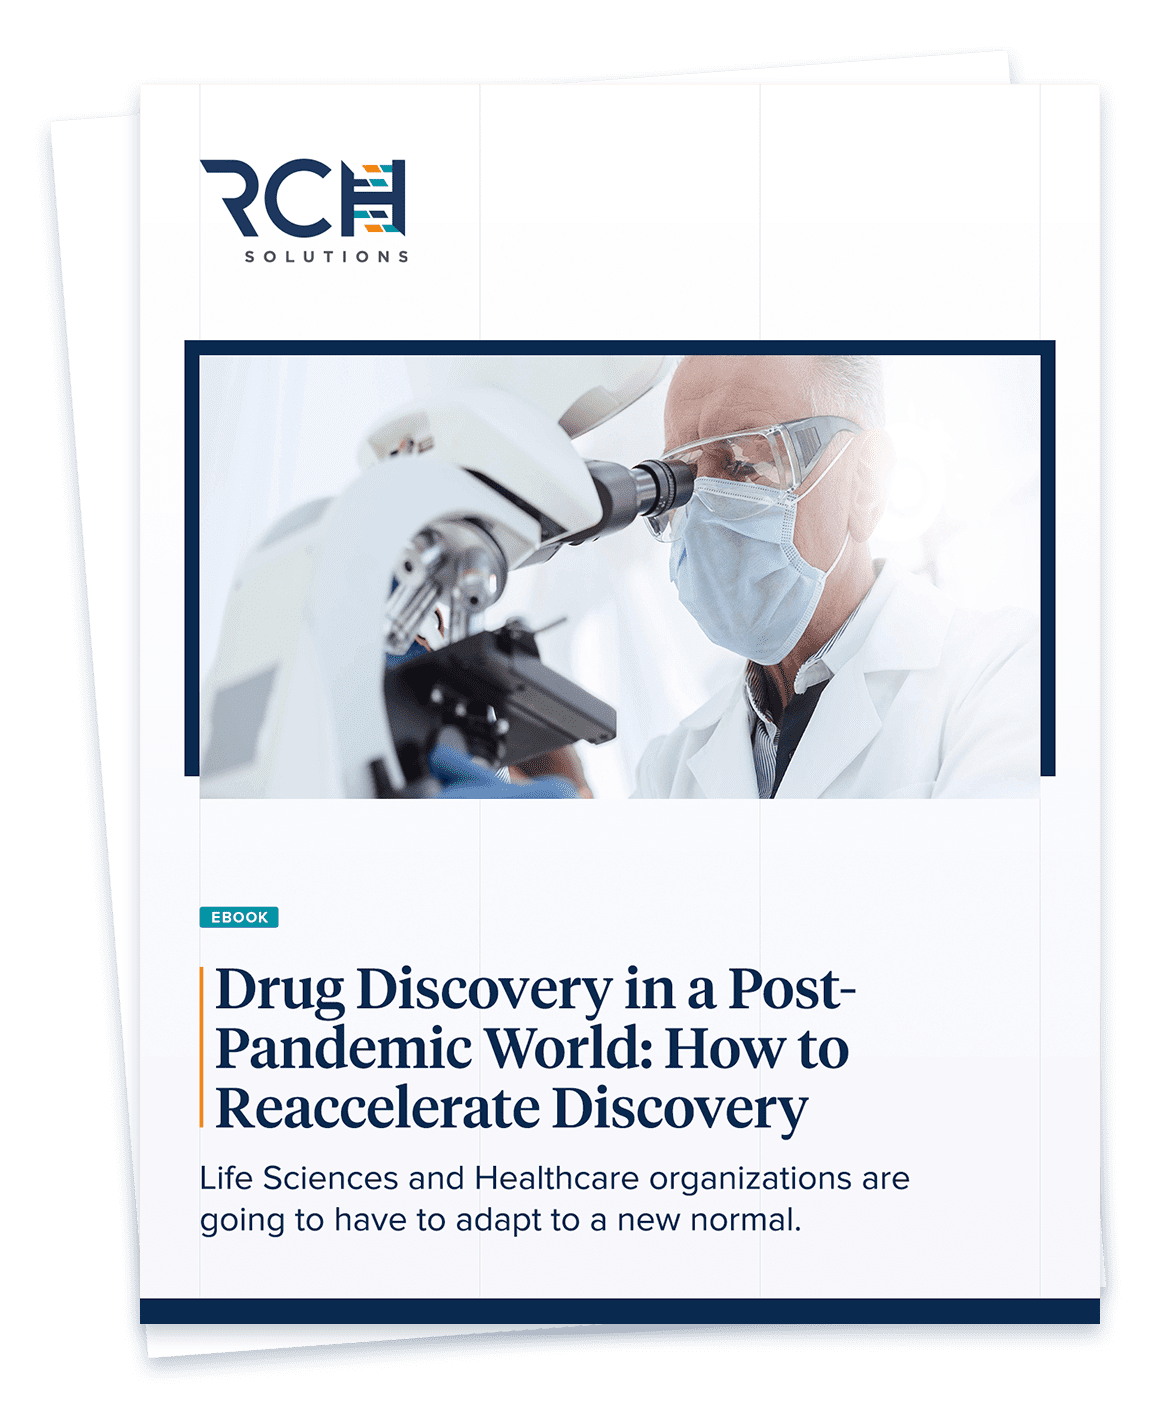 https://www.rchsolutions.com/wp-content/uploads/2022/02/RCH_eBook_PostPandemicDiscovery_Thumbnail.png